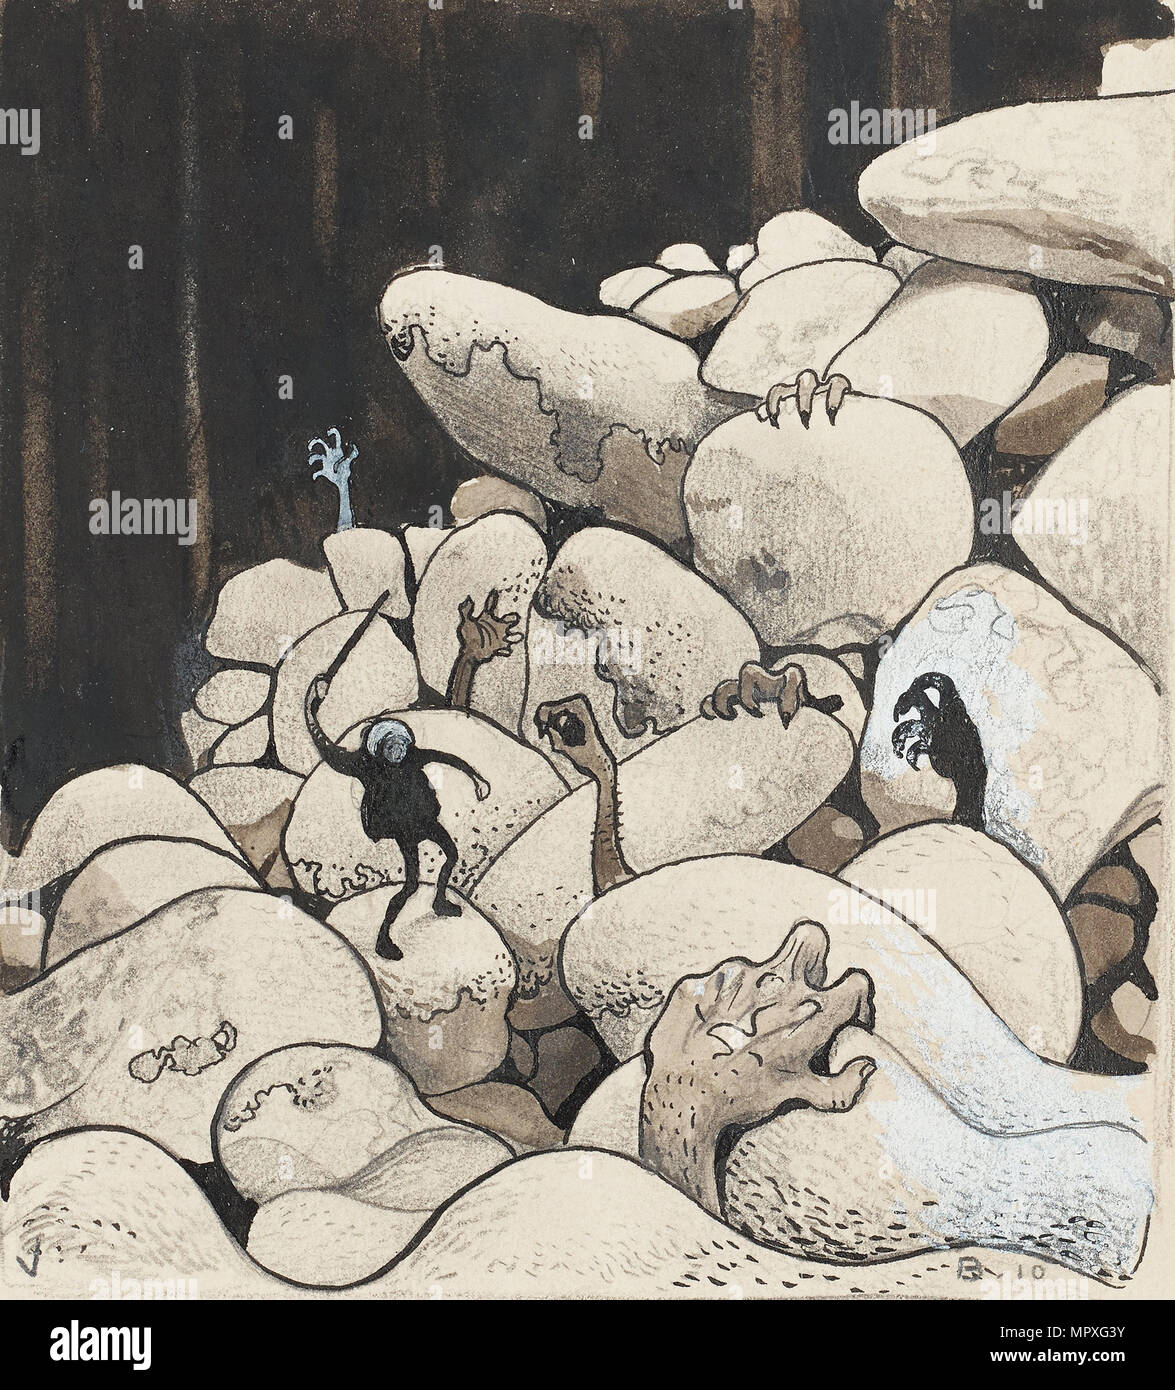 Trolls amongst the stones. Illustration for Bland tomtar och troll (Among Gnomes and Trolls) by Al Stock Photo